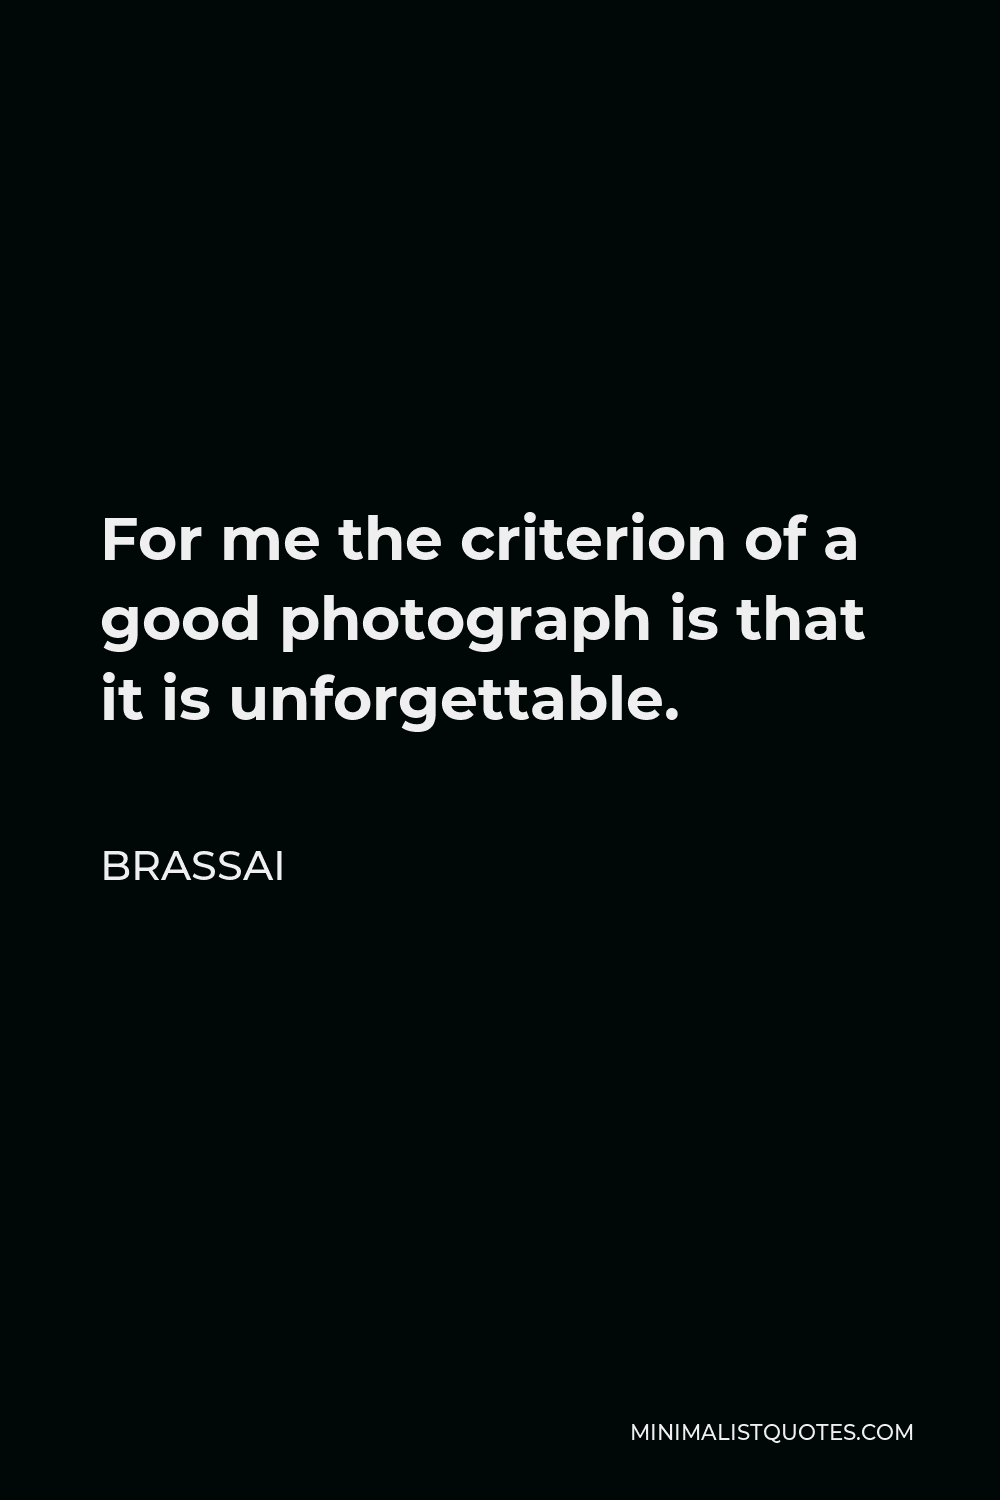 Brassai Quote - For me the criterion of a good photograph is that it is unforgettable.